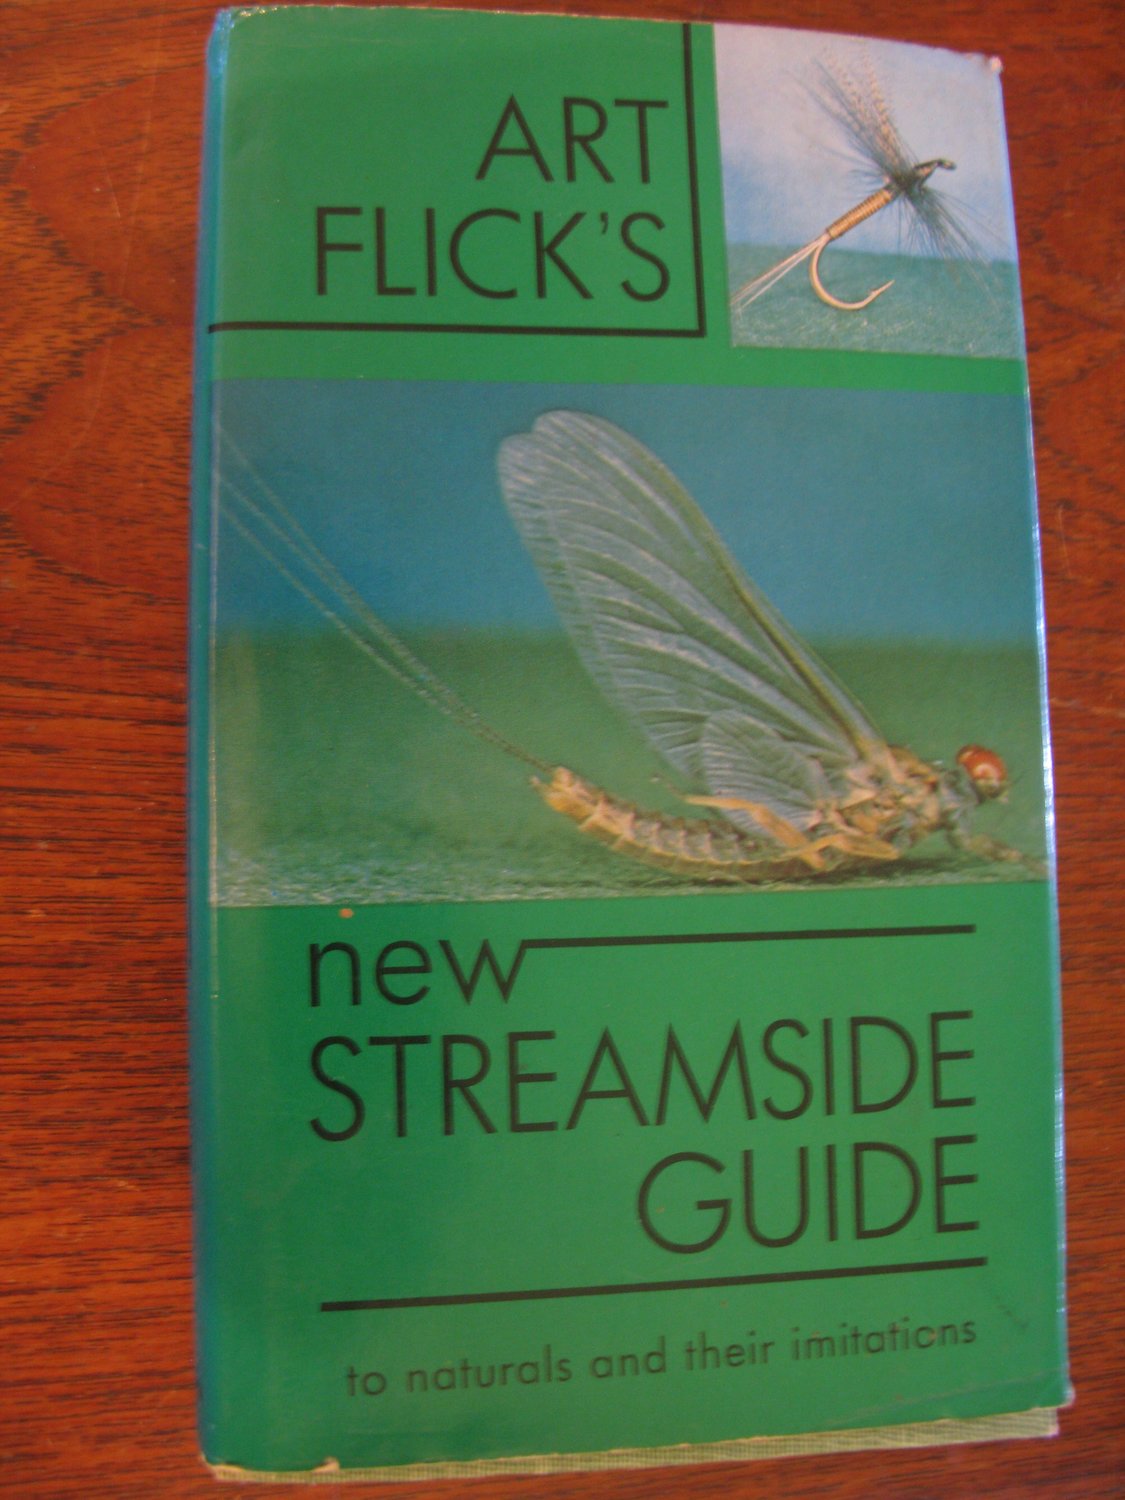 Art Flick’s Streamside Guide was first published in 1947 and is still in print today.